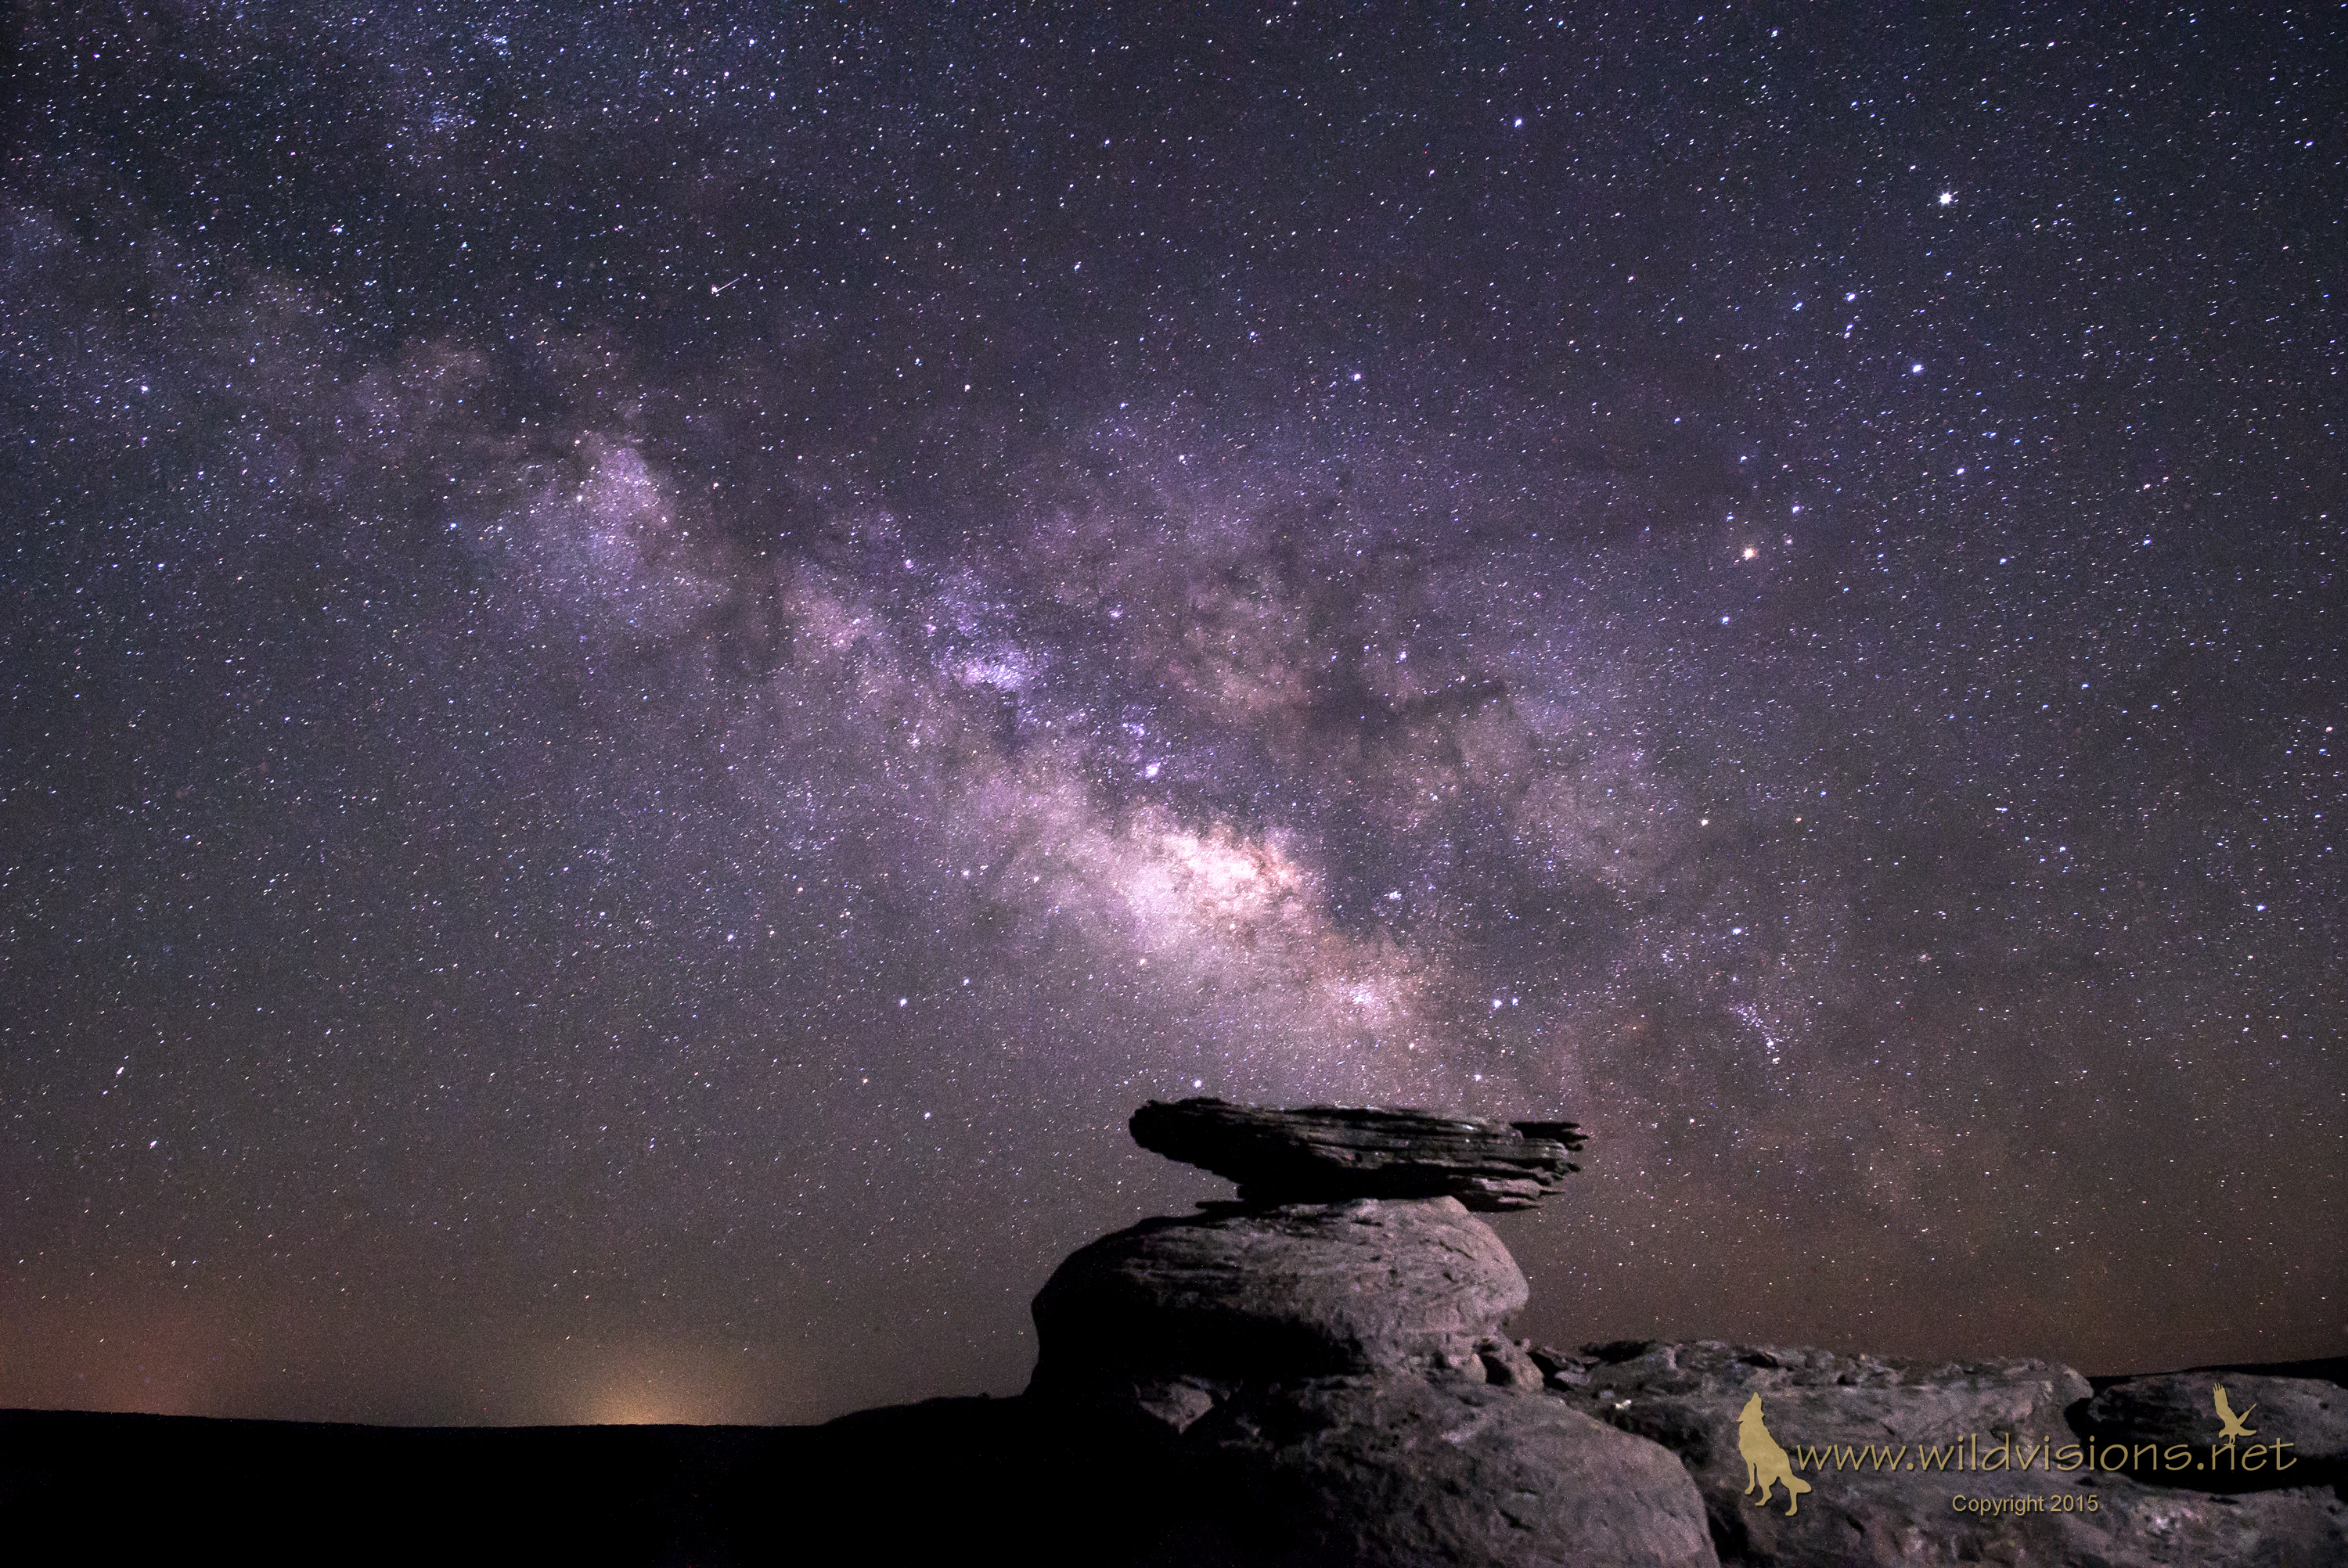 The Milky Way at night of Flying Saucer Rock in Snowflake Arizona